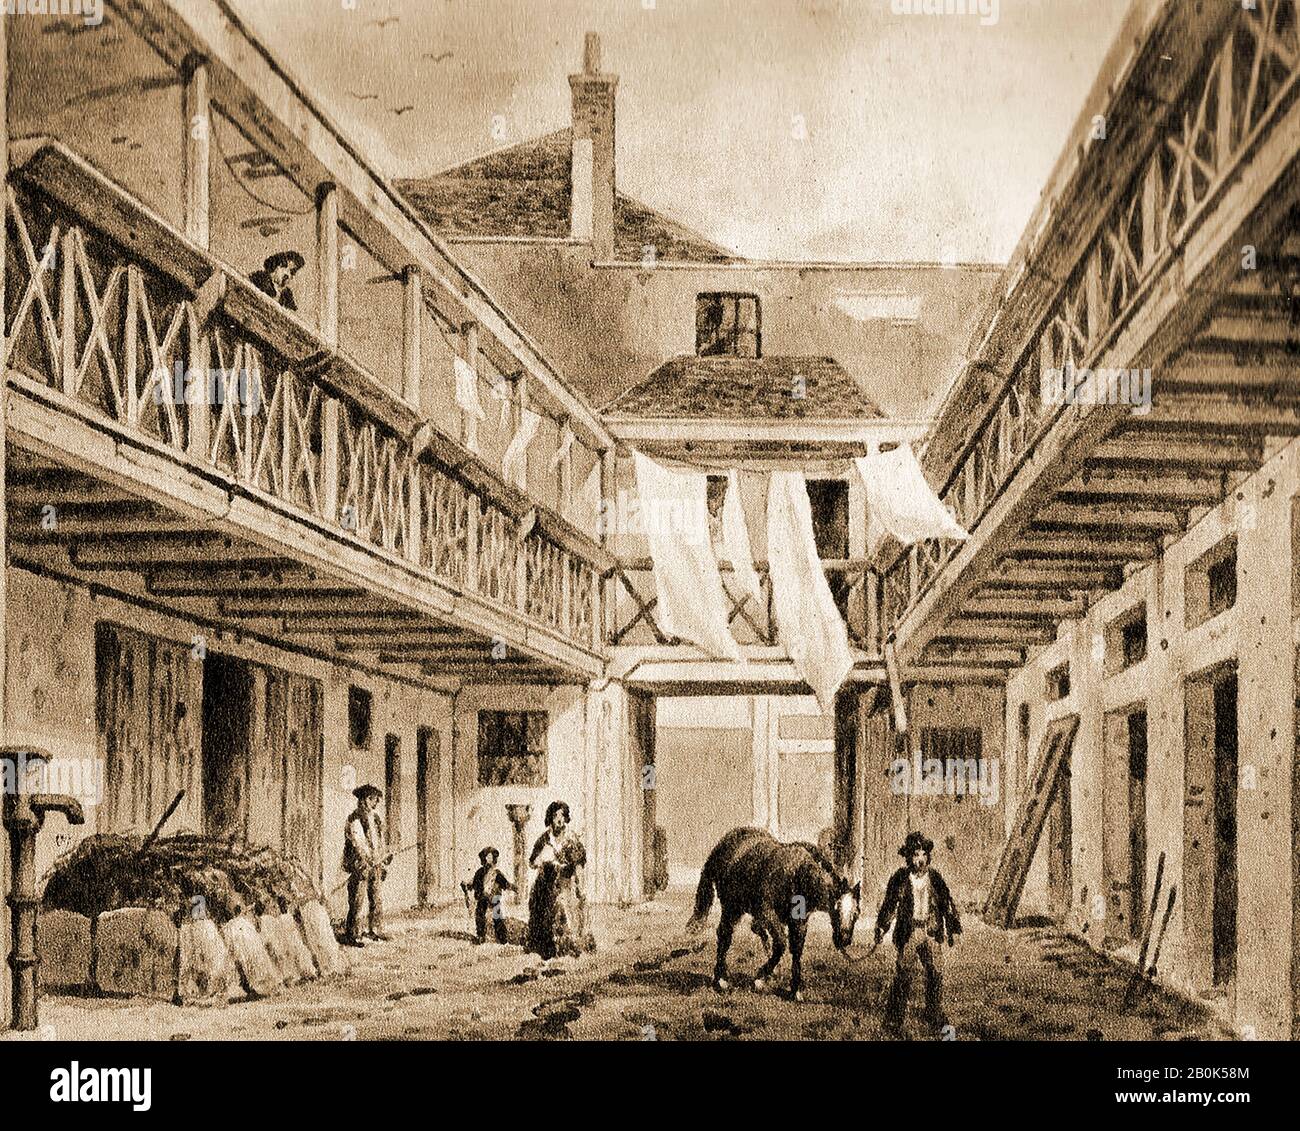 A very old engraving (or painting) showing the coach yard and stables at the King's Arms Tavern, (sometimes called the King's Head) 132  High Holborn, London, UK (Circa 1850). The image is interesting in that it shows the building 'warts and all' with washing hanging from the galleries and a groom, hay fork in hand standing next to a pile of recently gathered horse dung and straw. A water pump stands to the left. Stock Photo